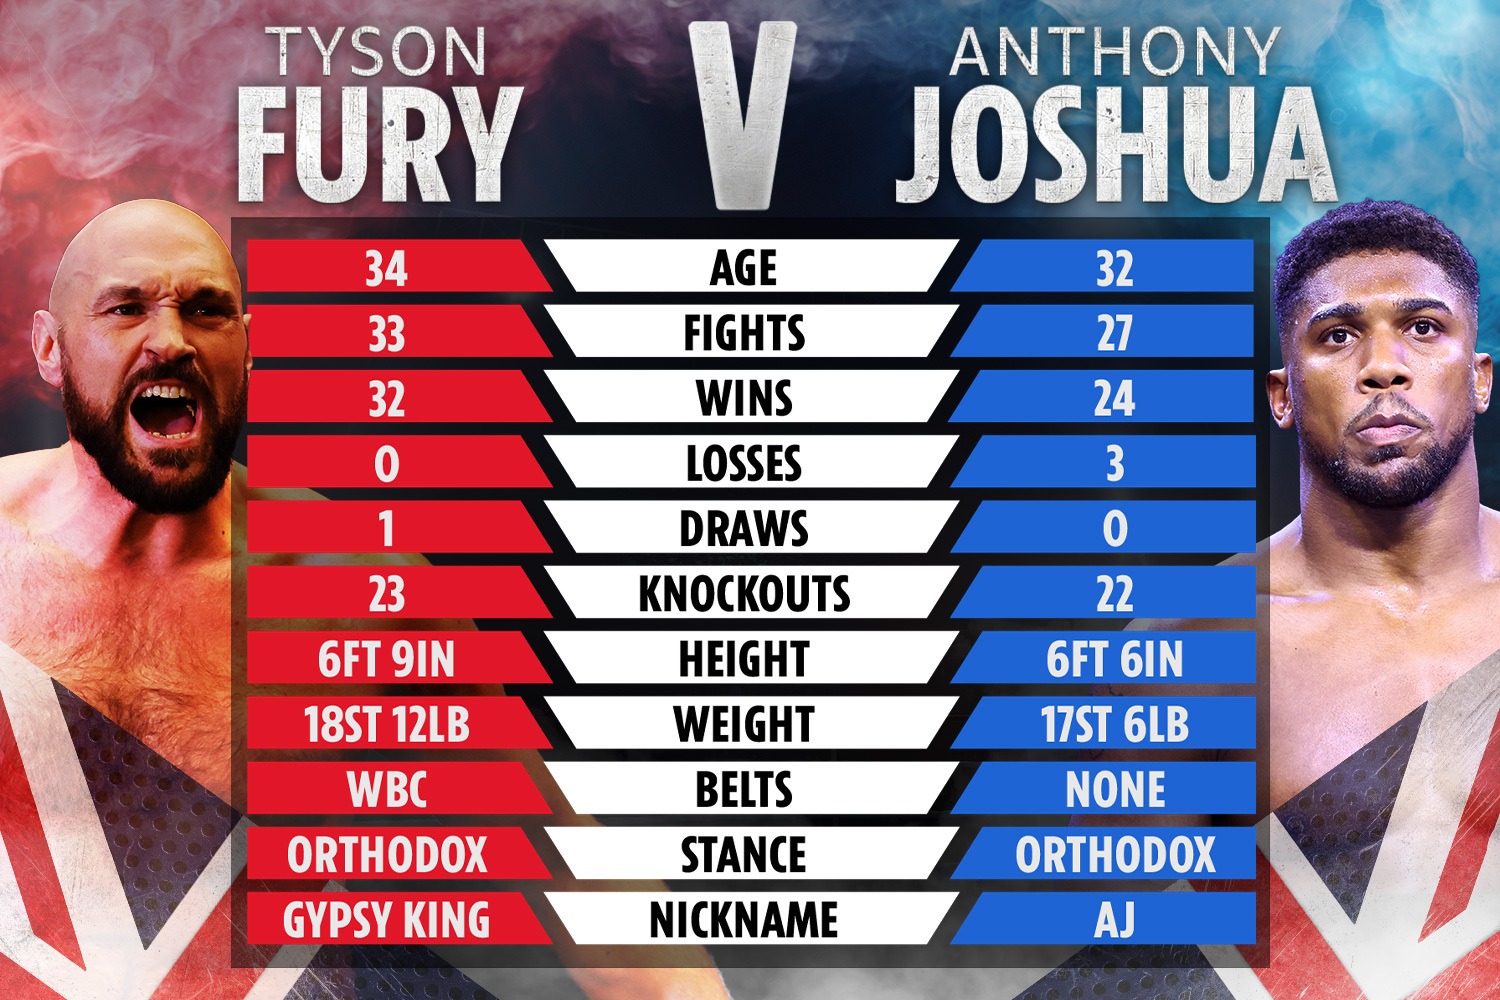 , Anthony Joshua confirms he WILL sign contract for Tyson Fury fight on December 3 as he says ‘it’s with the legal team’